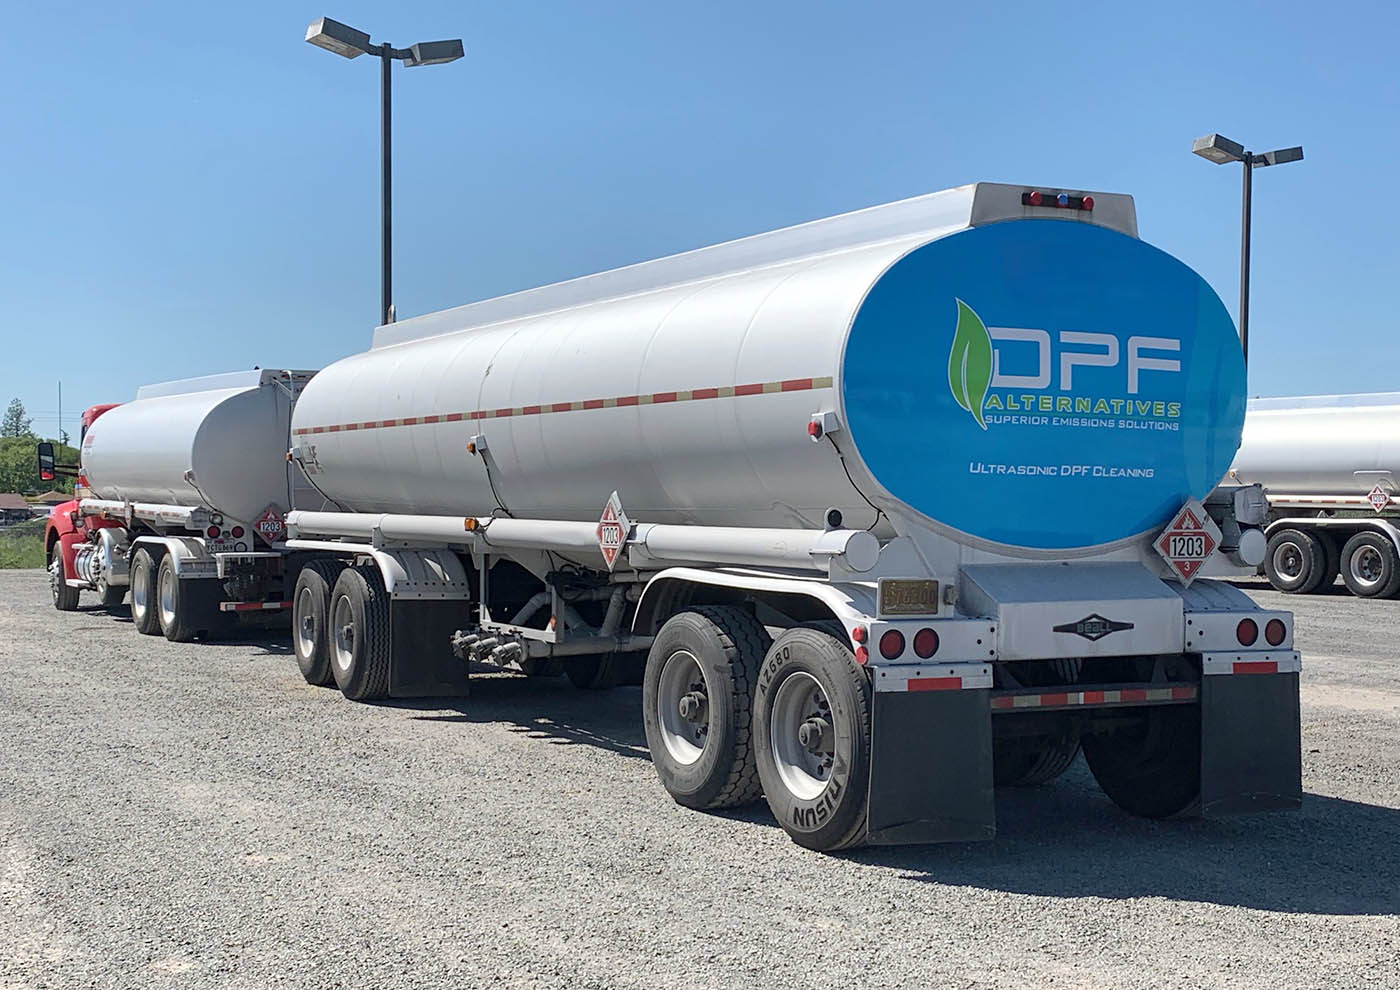 Back of a clean, large, reflective semi truck rig, contact DPF Alternatives for a DPF cleaning in Farmington / New Mexico.